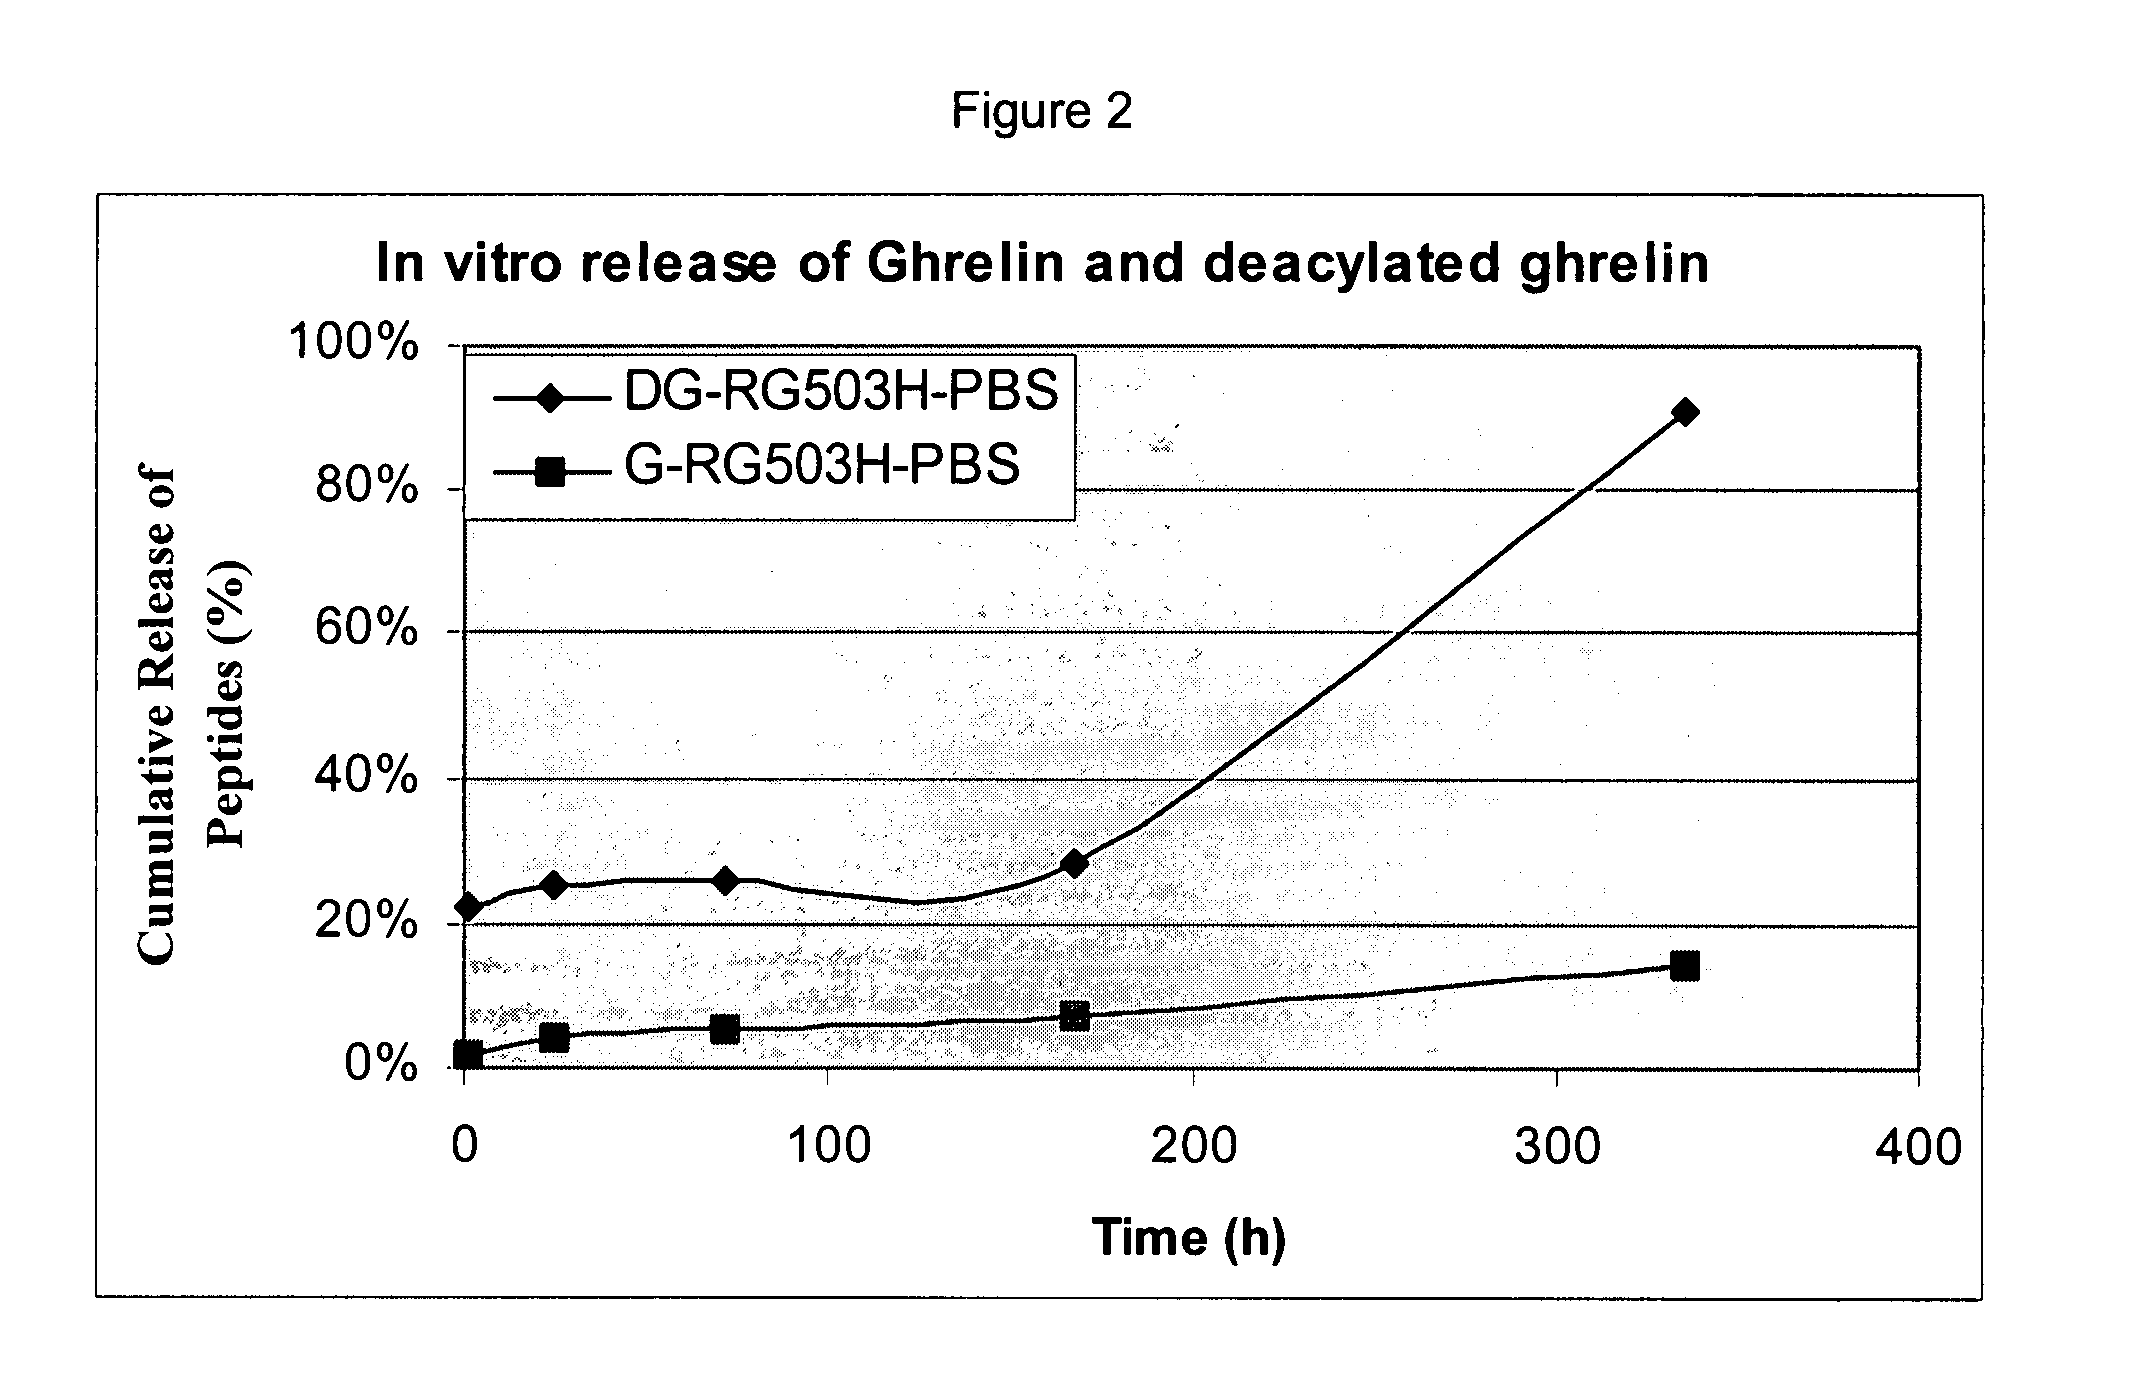 Pharmaceutical compositions for sustained release delivery of peptides